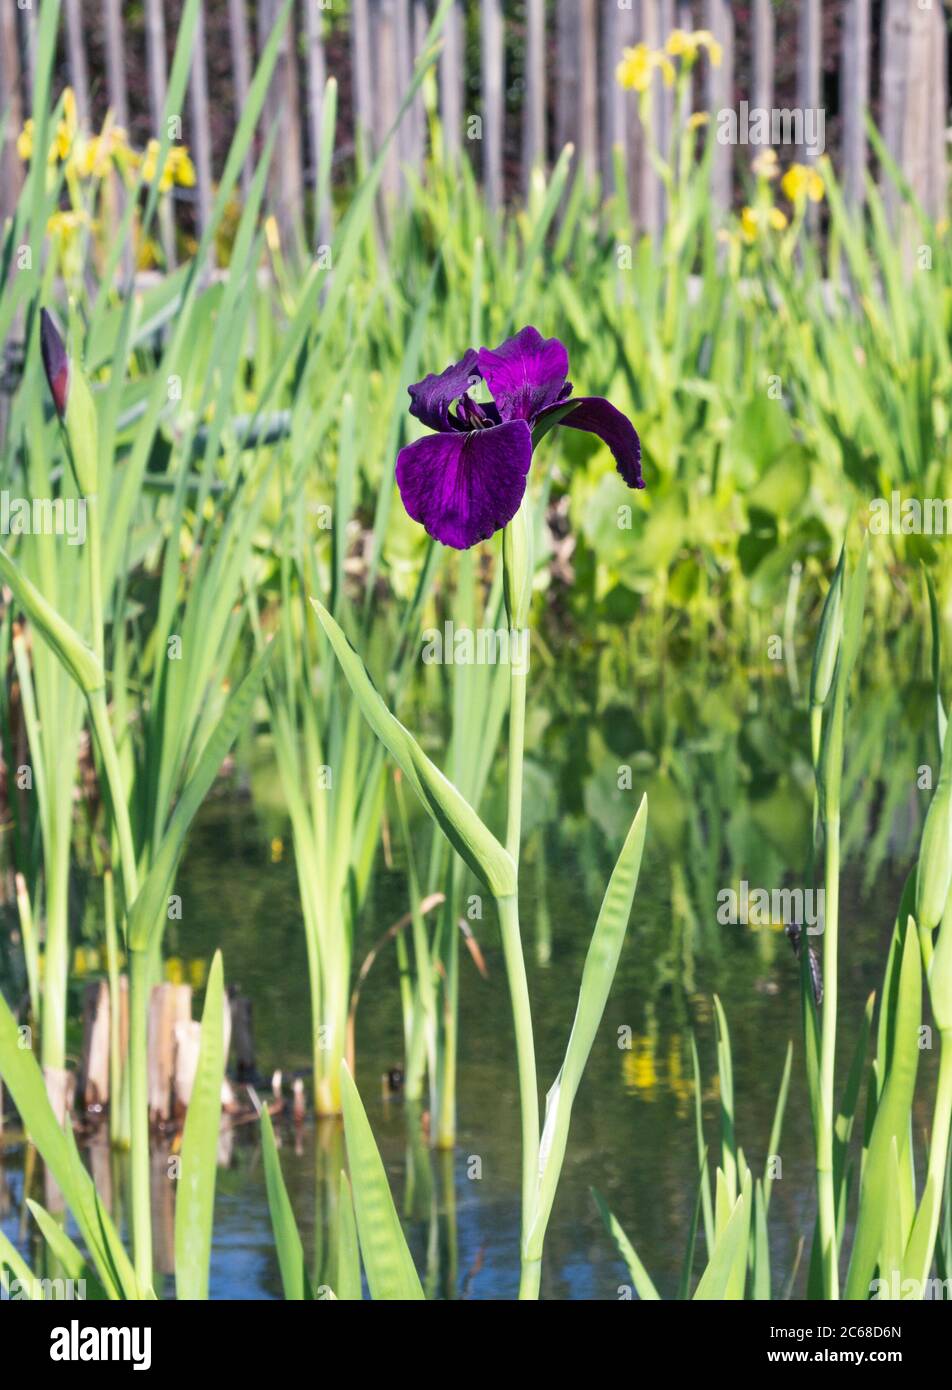 A close up shot of a single purple water iris in pond. Yellow Iris plants in background .  Stock Photo